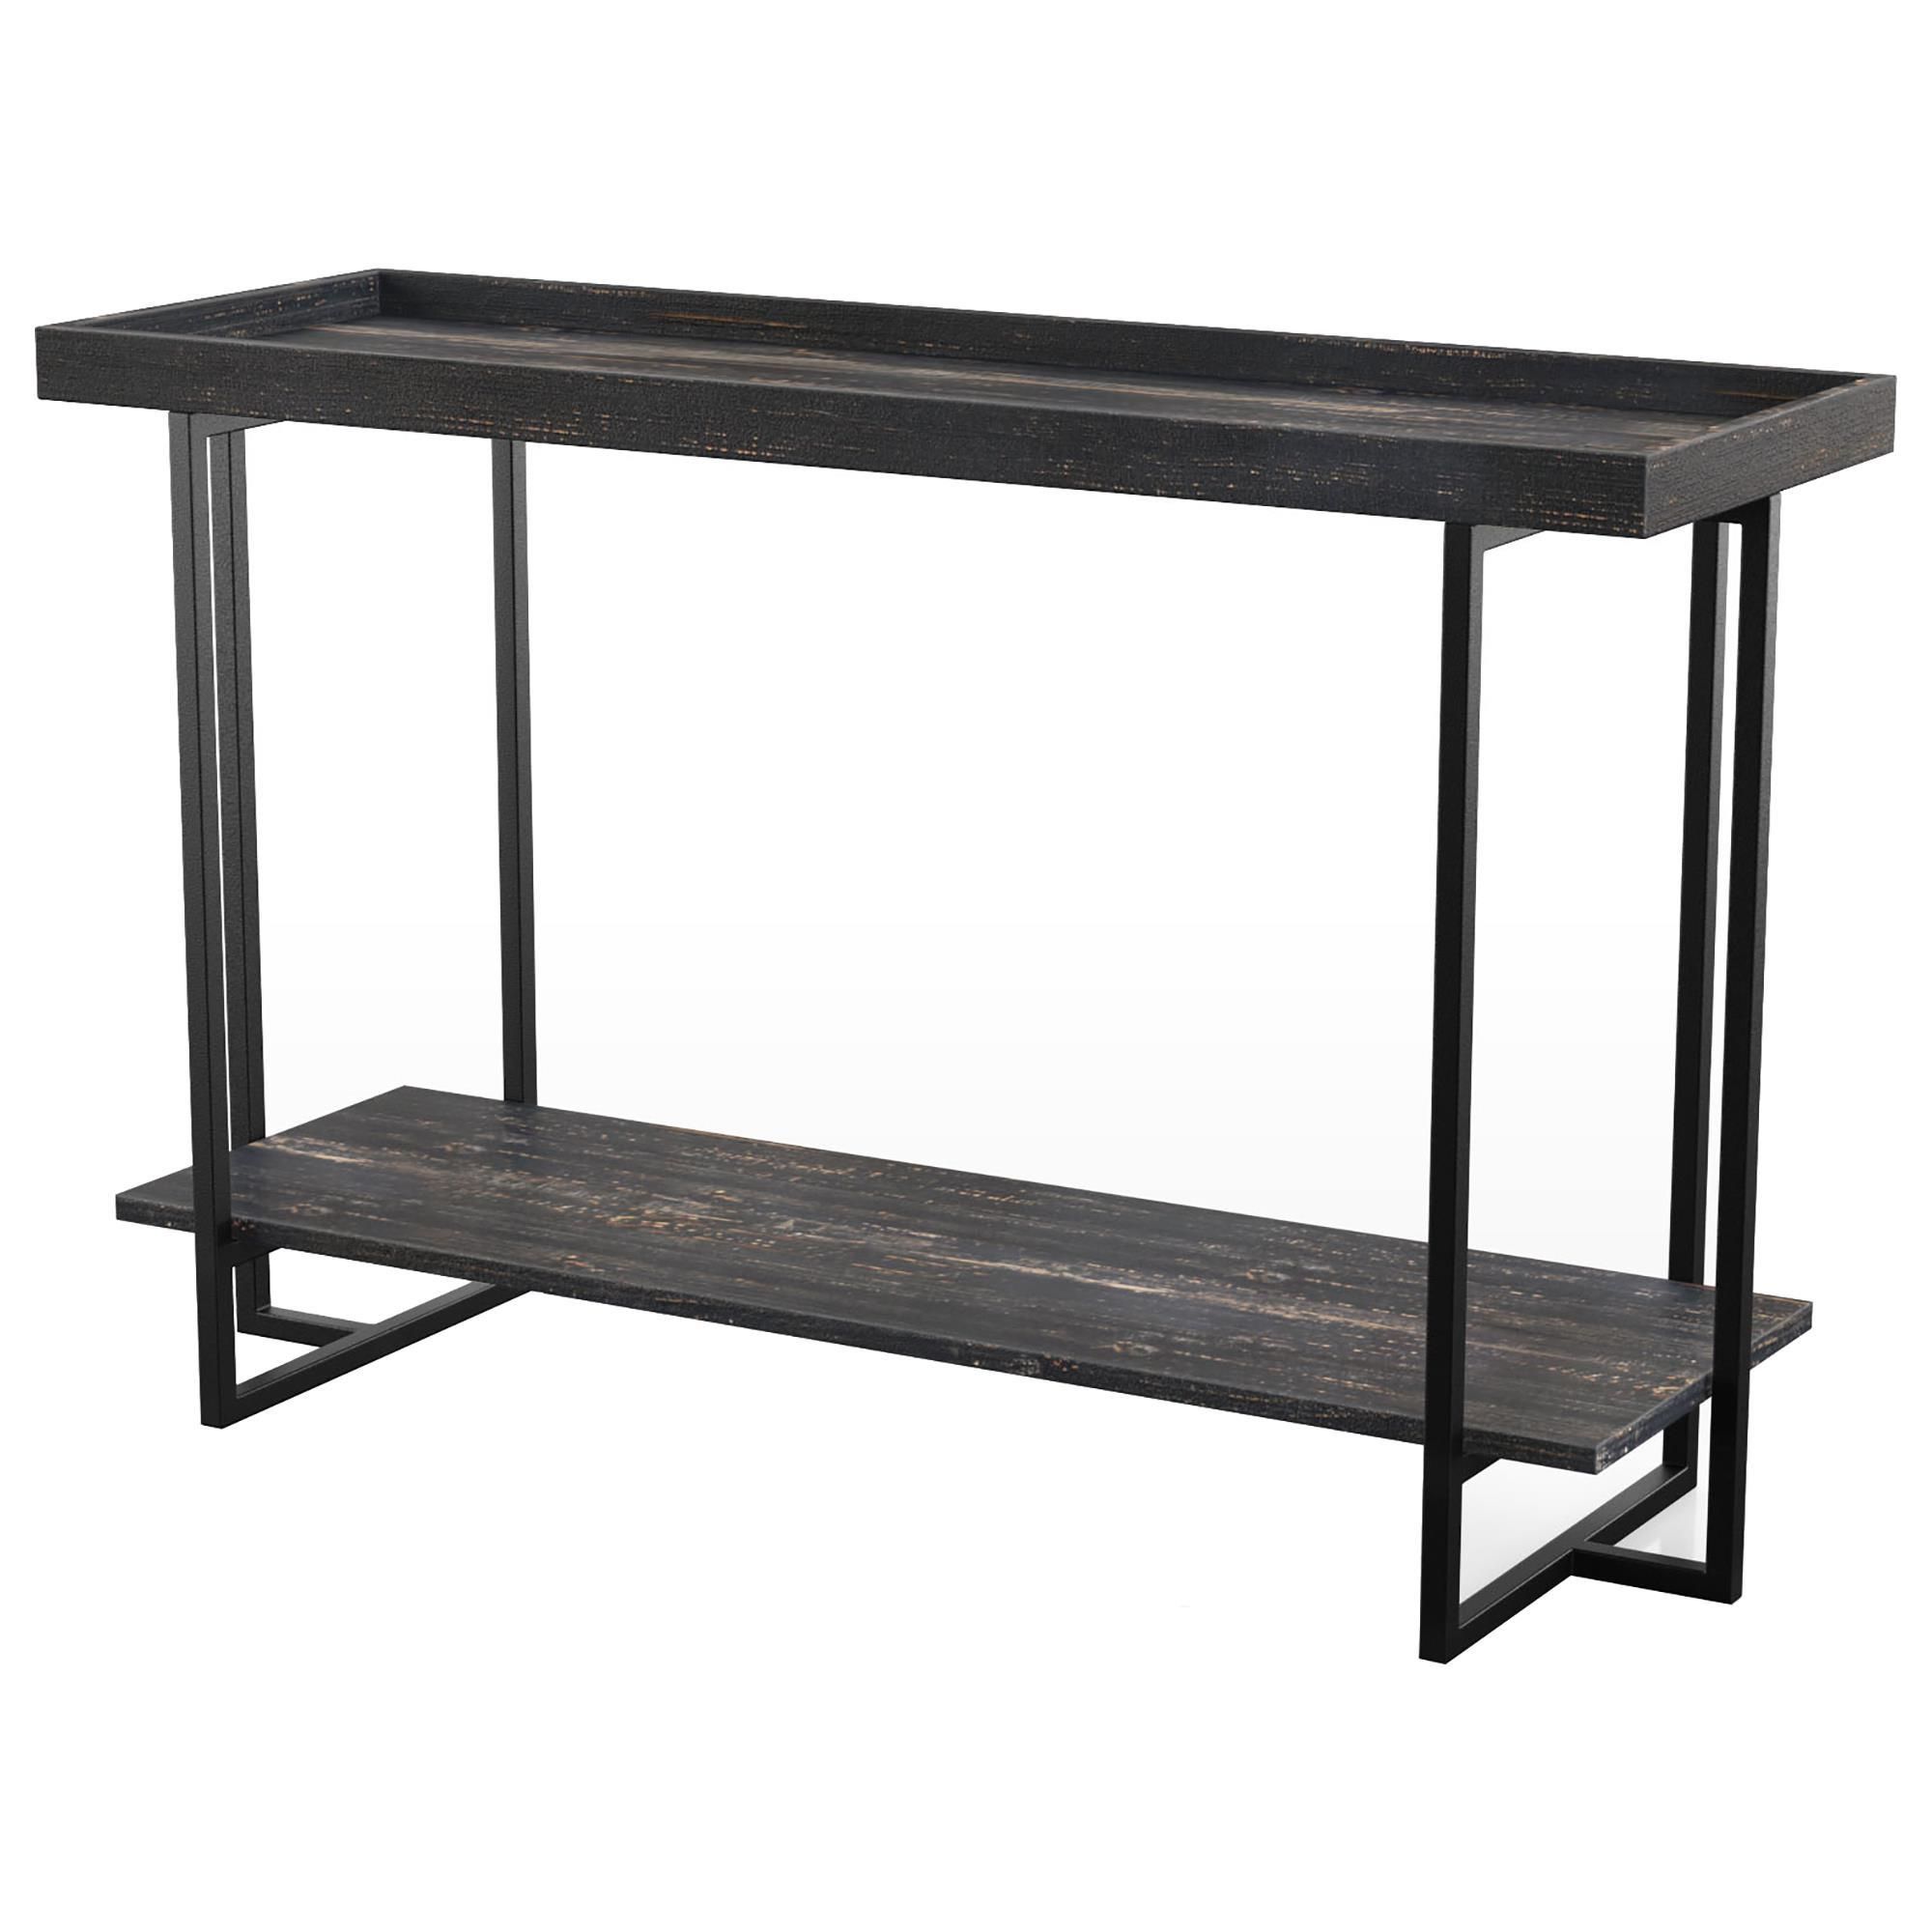 2 Shelf Console Tables Intended For Most Popular Furniture Of America Dalton 2 Shelf Console Table In (View 3 of 10)